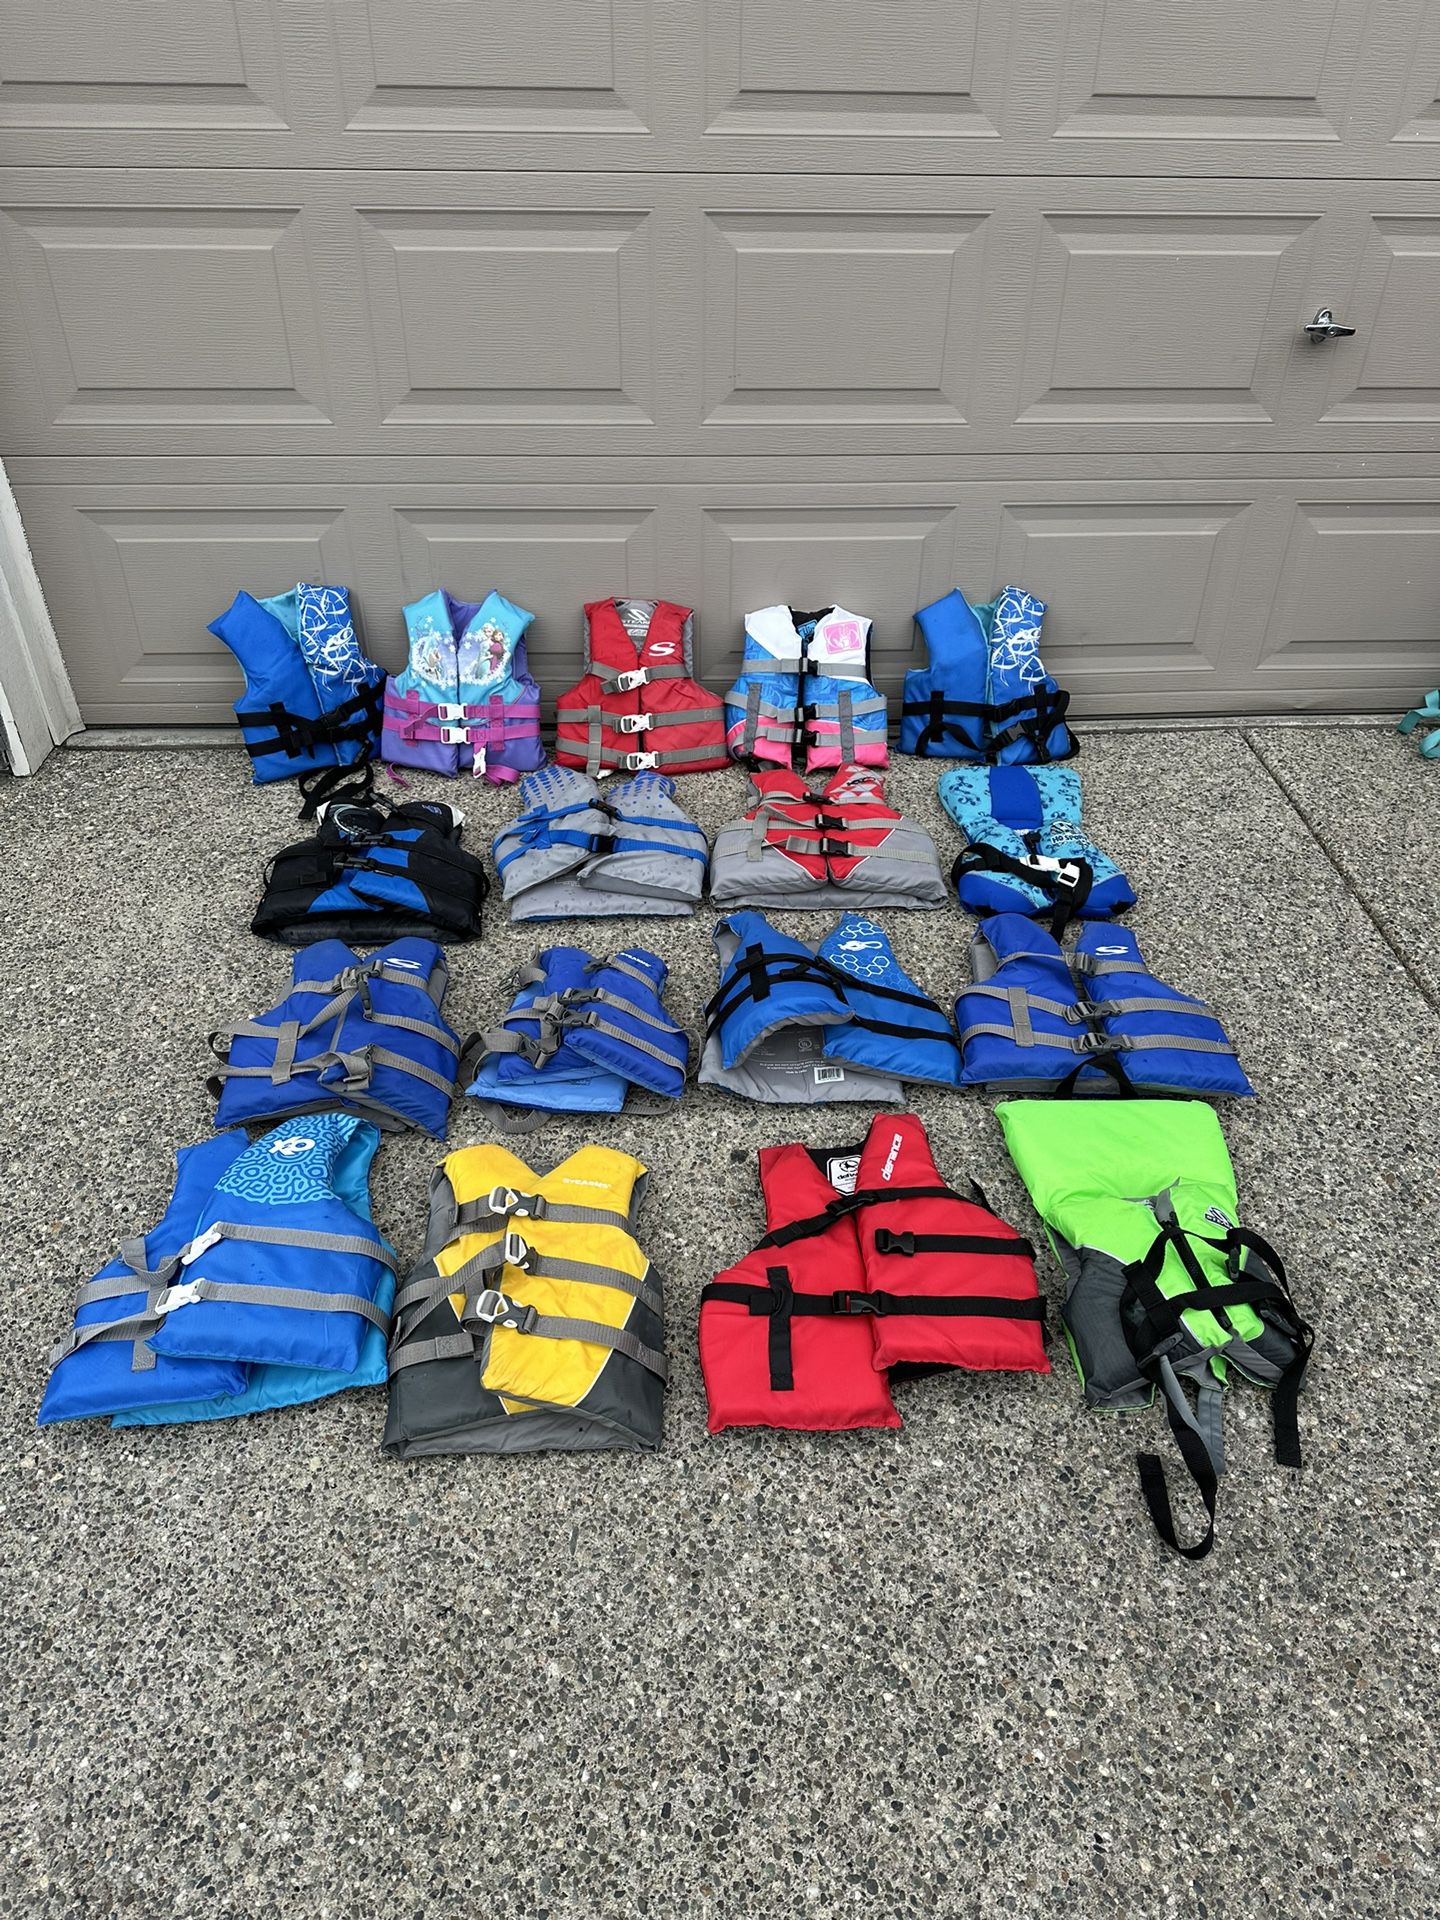 Kids Life Jackets And Life Vests